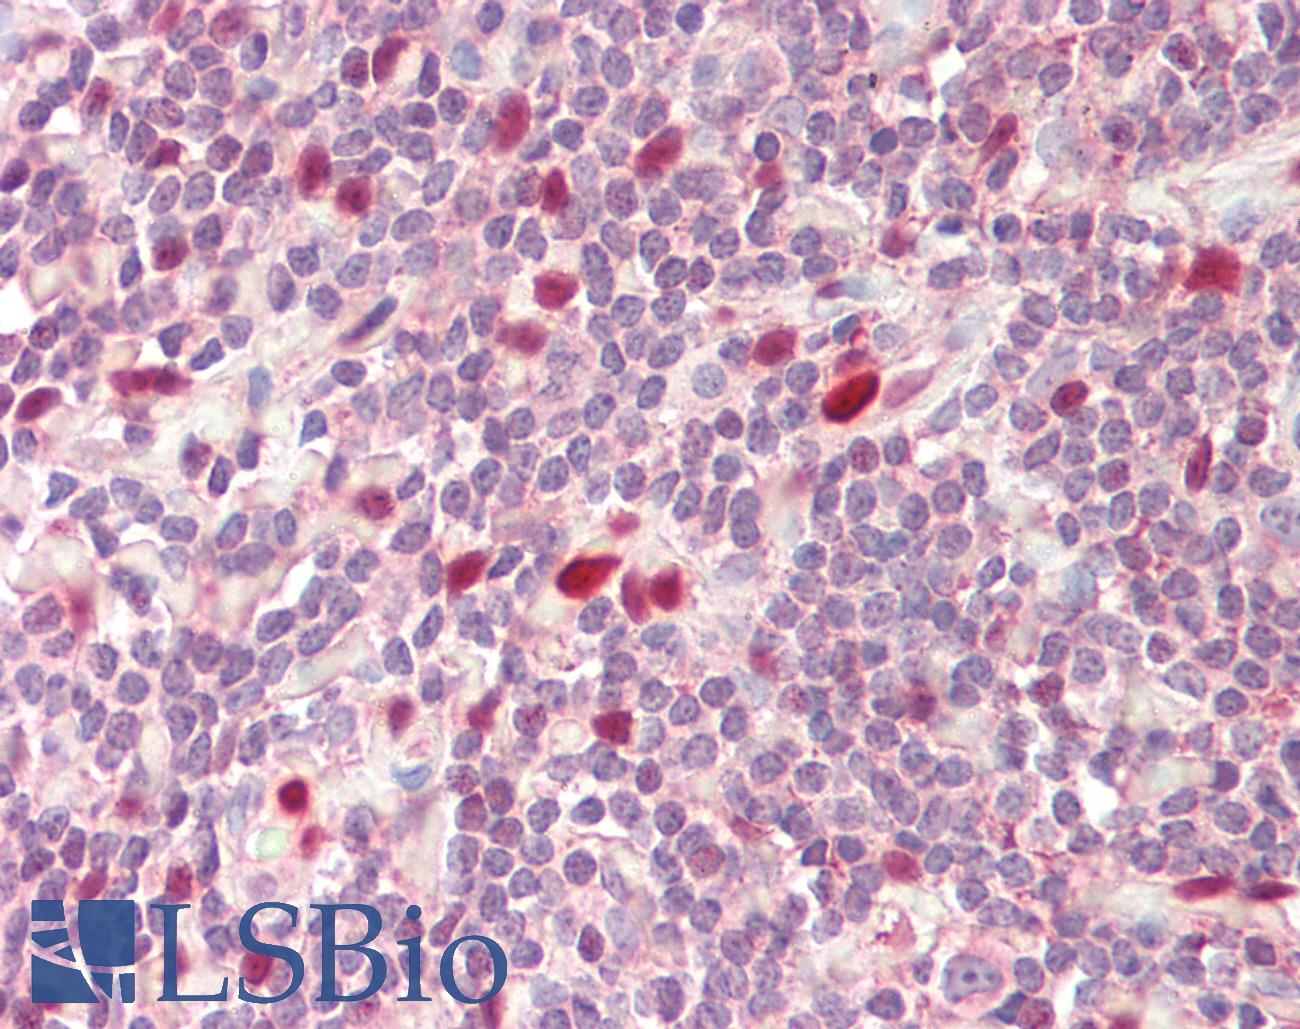 IL-33 Antibody - Small intestine: Formalin-Fixed, Paraffin-Embedded (FFPE), at a dilution of 1:200